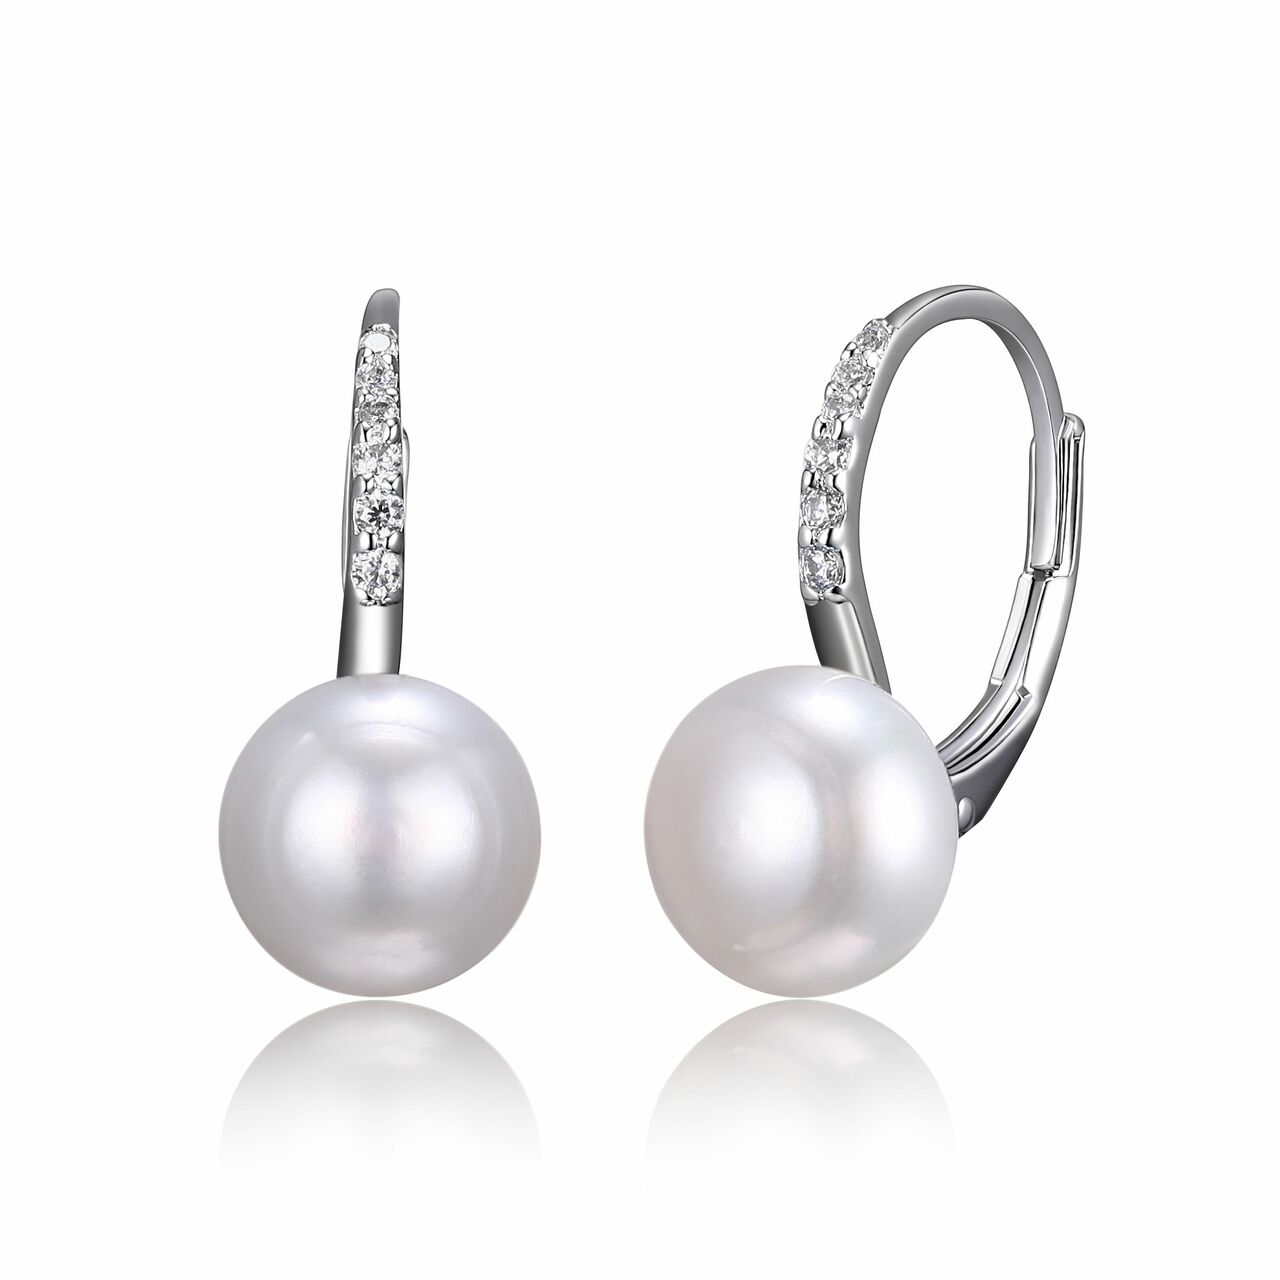 Reign Sterling Silver and CZ Pearl Leverback Earrings | R2AKD9926G